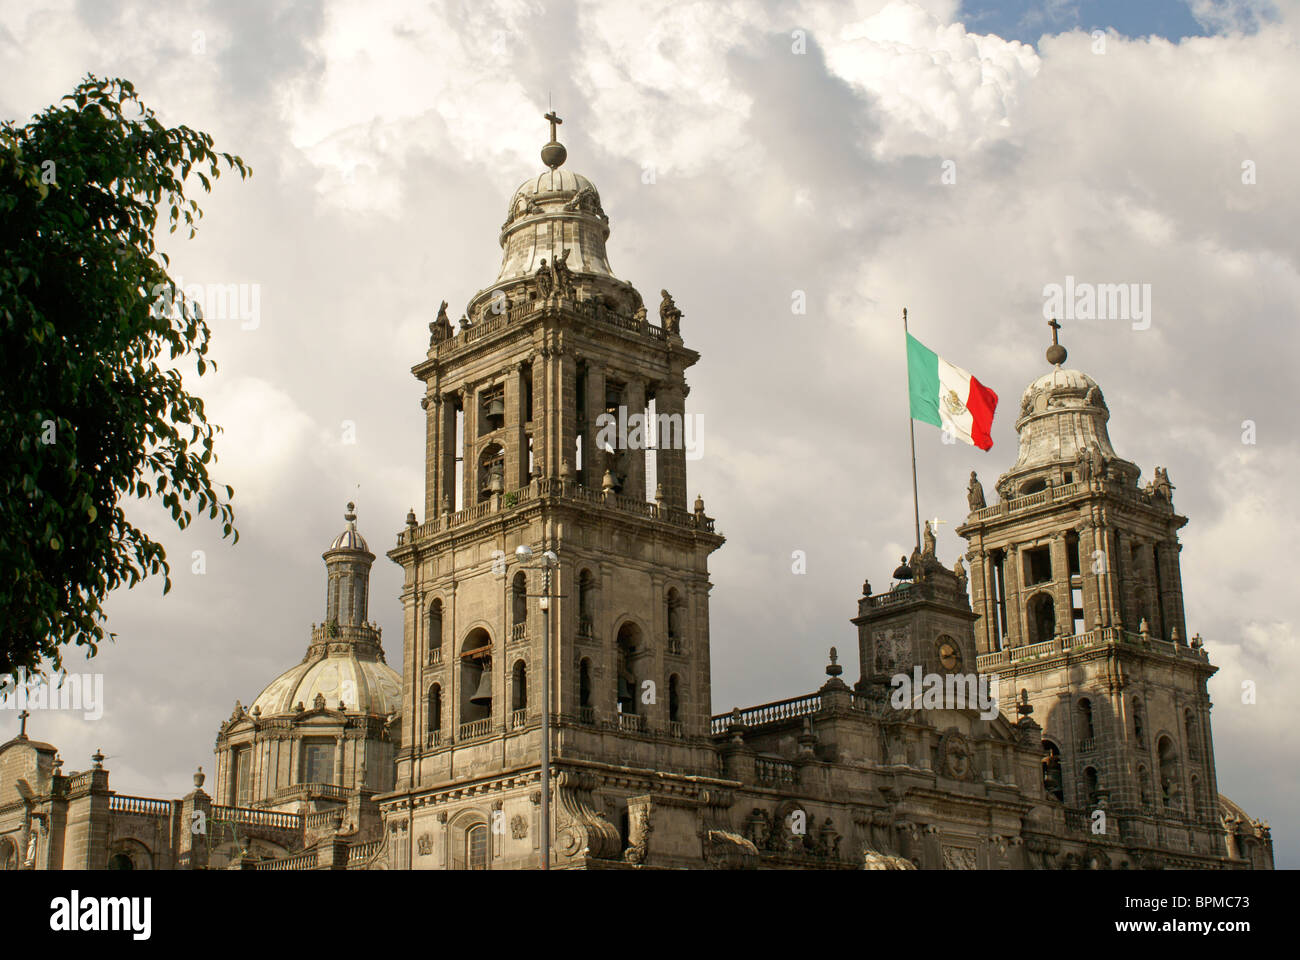 Steeples of the Metropolitan Cathedral or Catedral Metropolitano on the Zocalo in downtown Mexico City Stock Photo